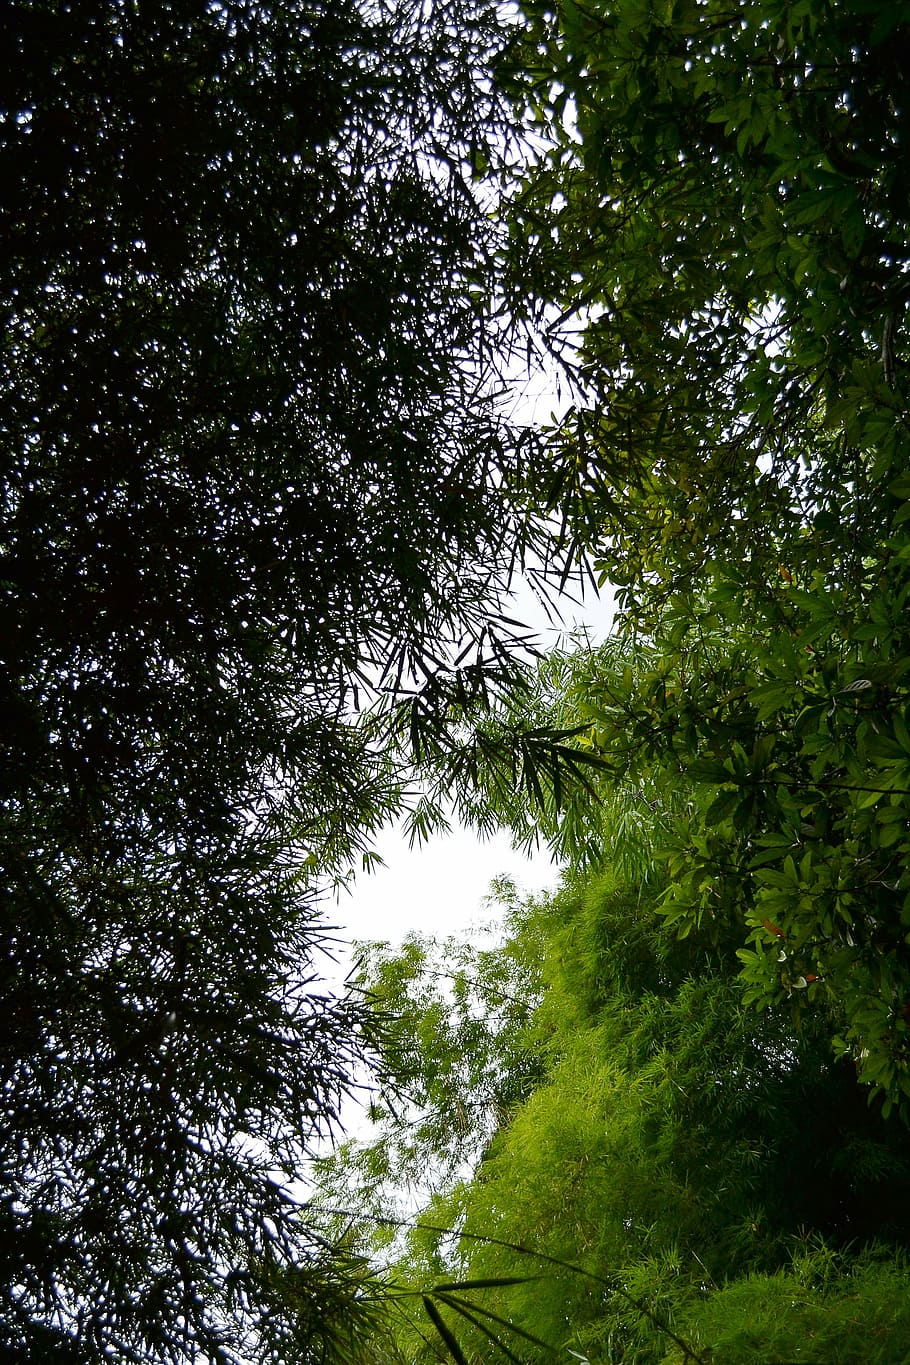 bamboo, leaves, bamboo plants, grass, bamboo shoot, grassy, trees, silhouette, plant, branch